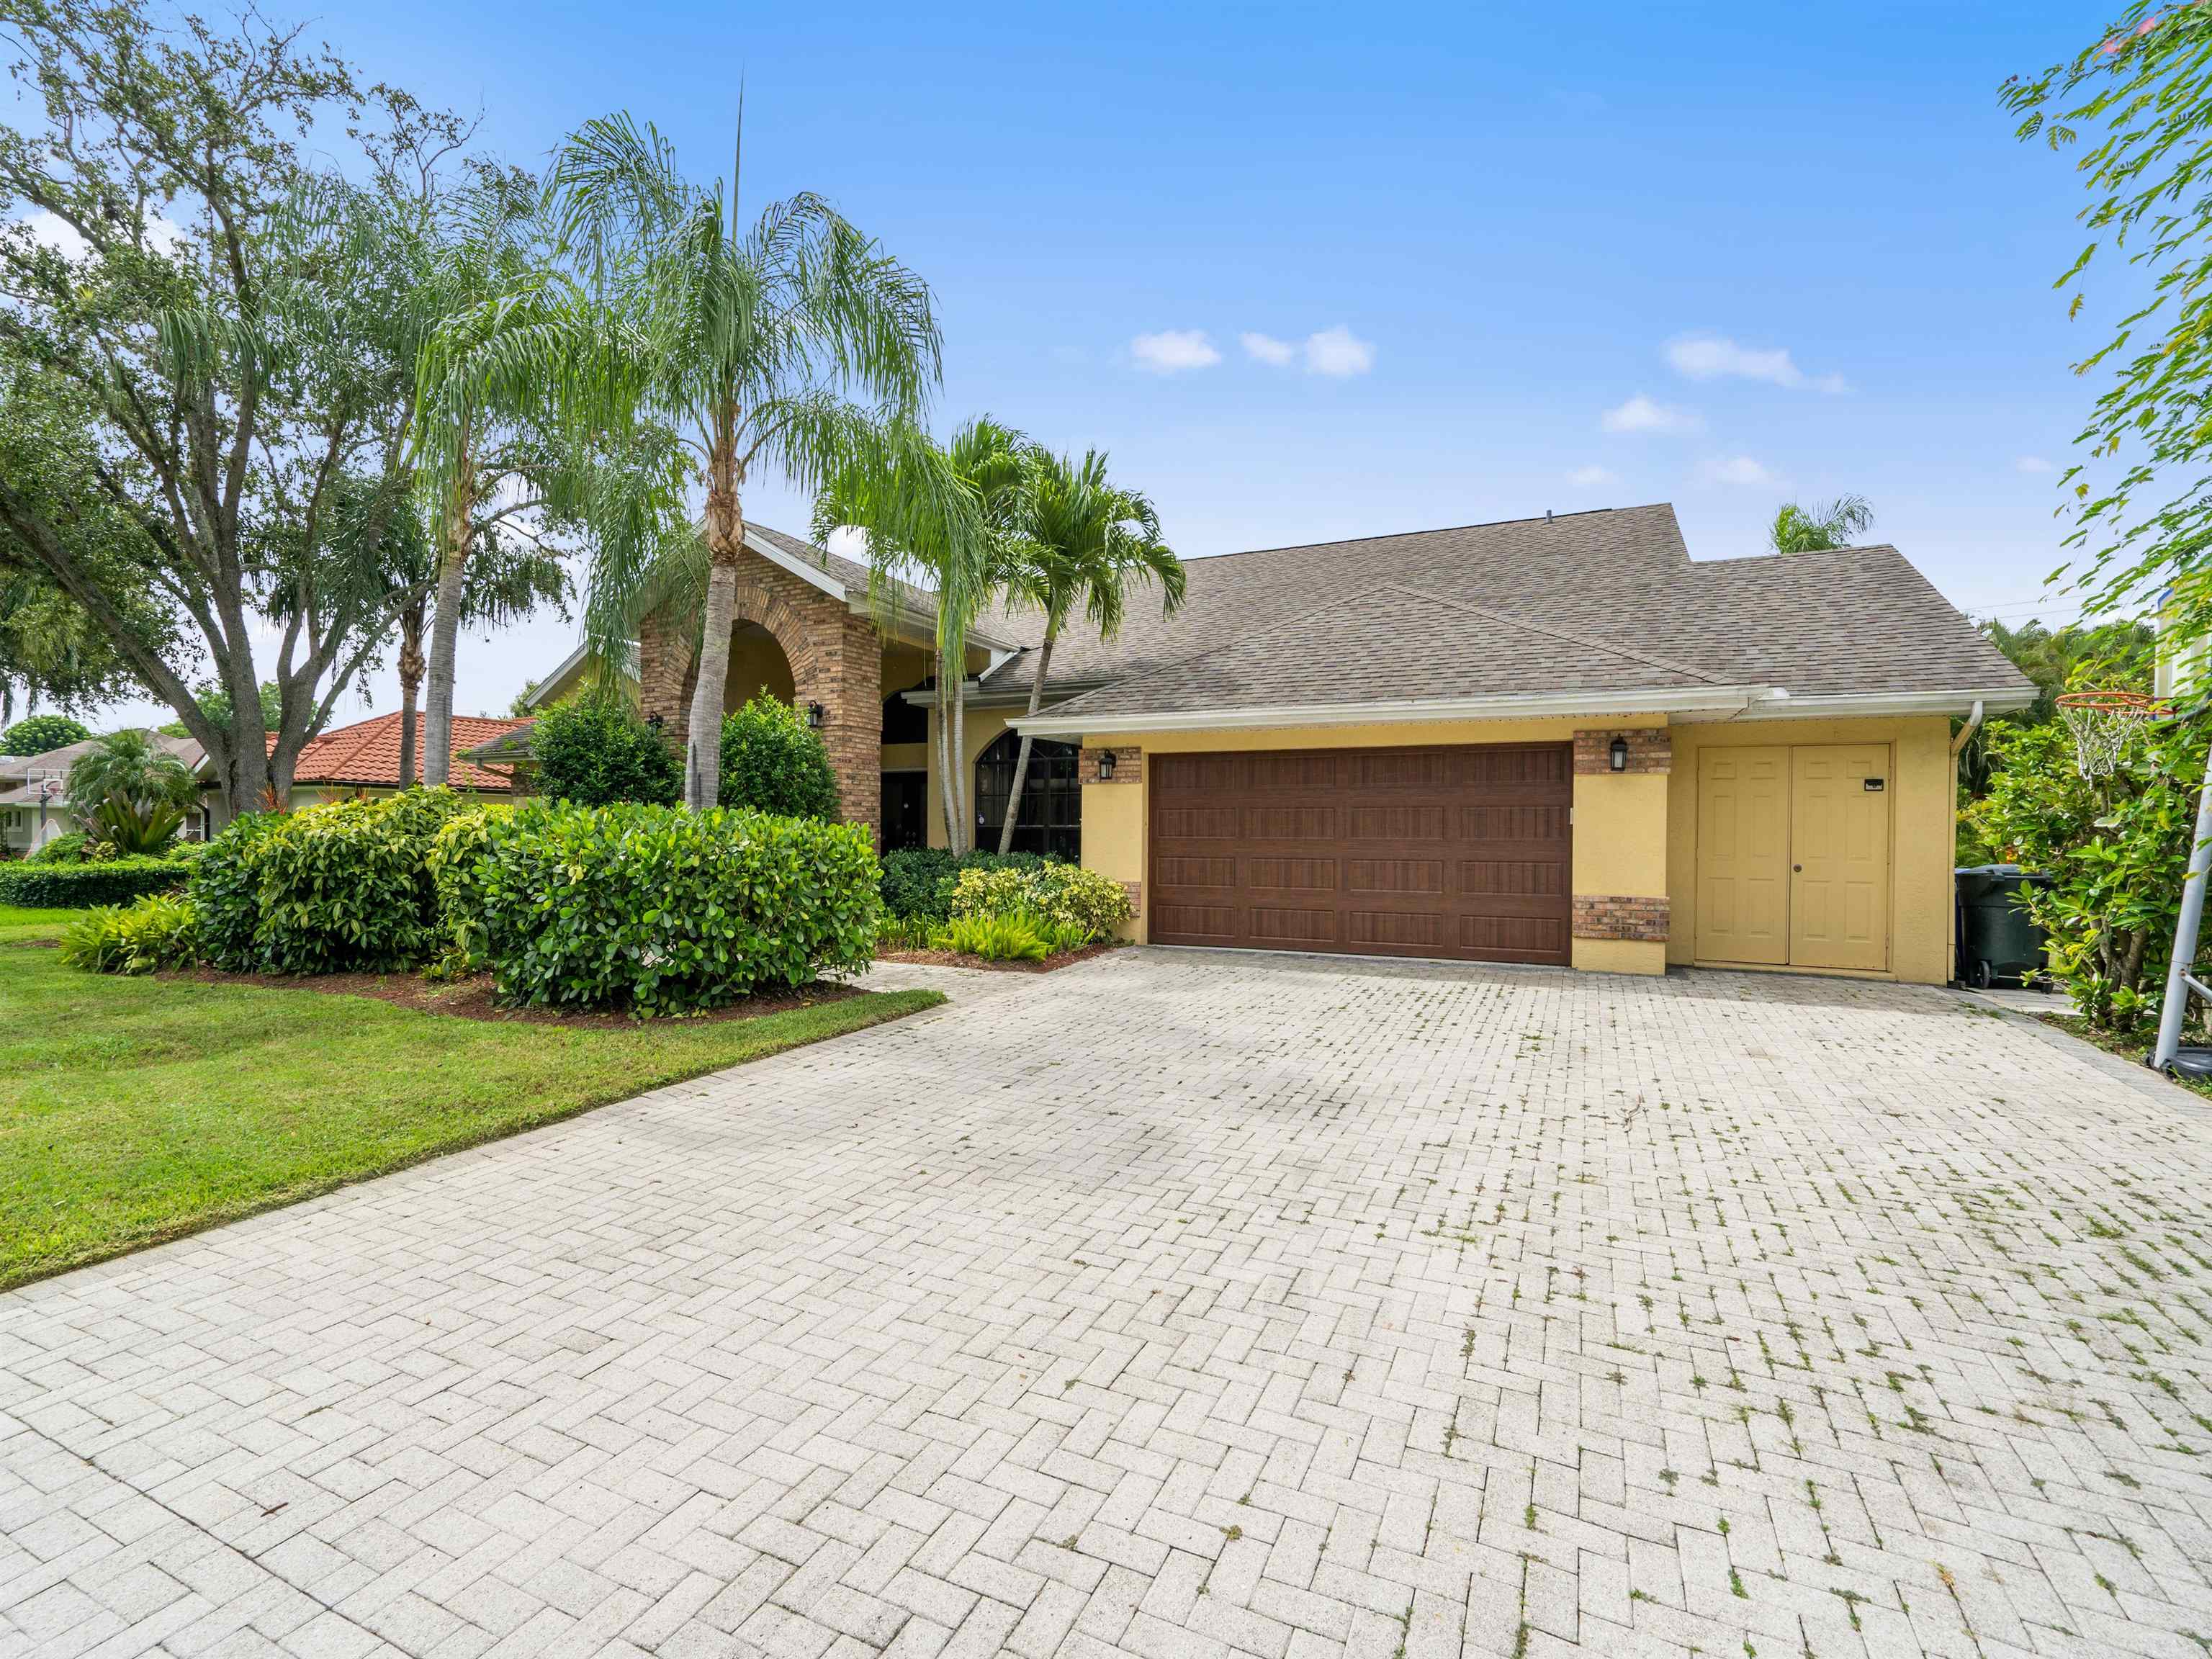 65 Timberland Cir S, Fort Myers, Florida 33919, 5 Bedrooms Bedrooms, ,3 BathroomsBathrooms,Residential,For Sale,Timberland Cir S,2220431